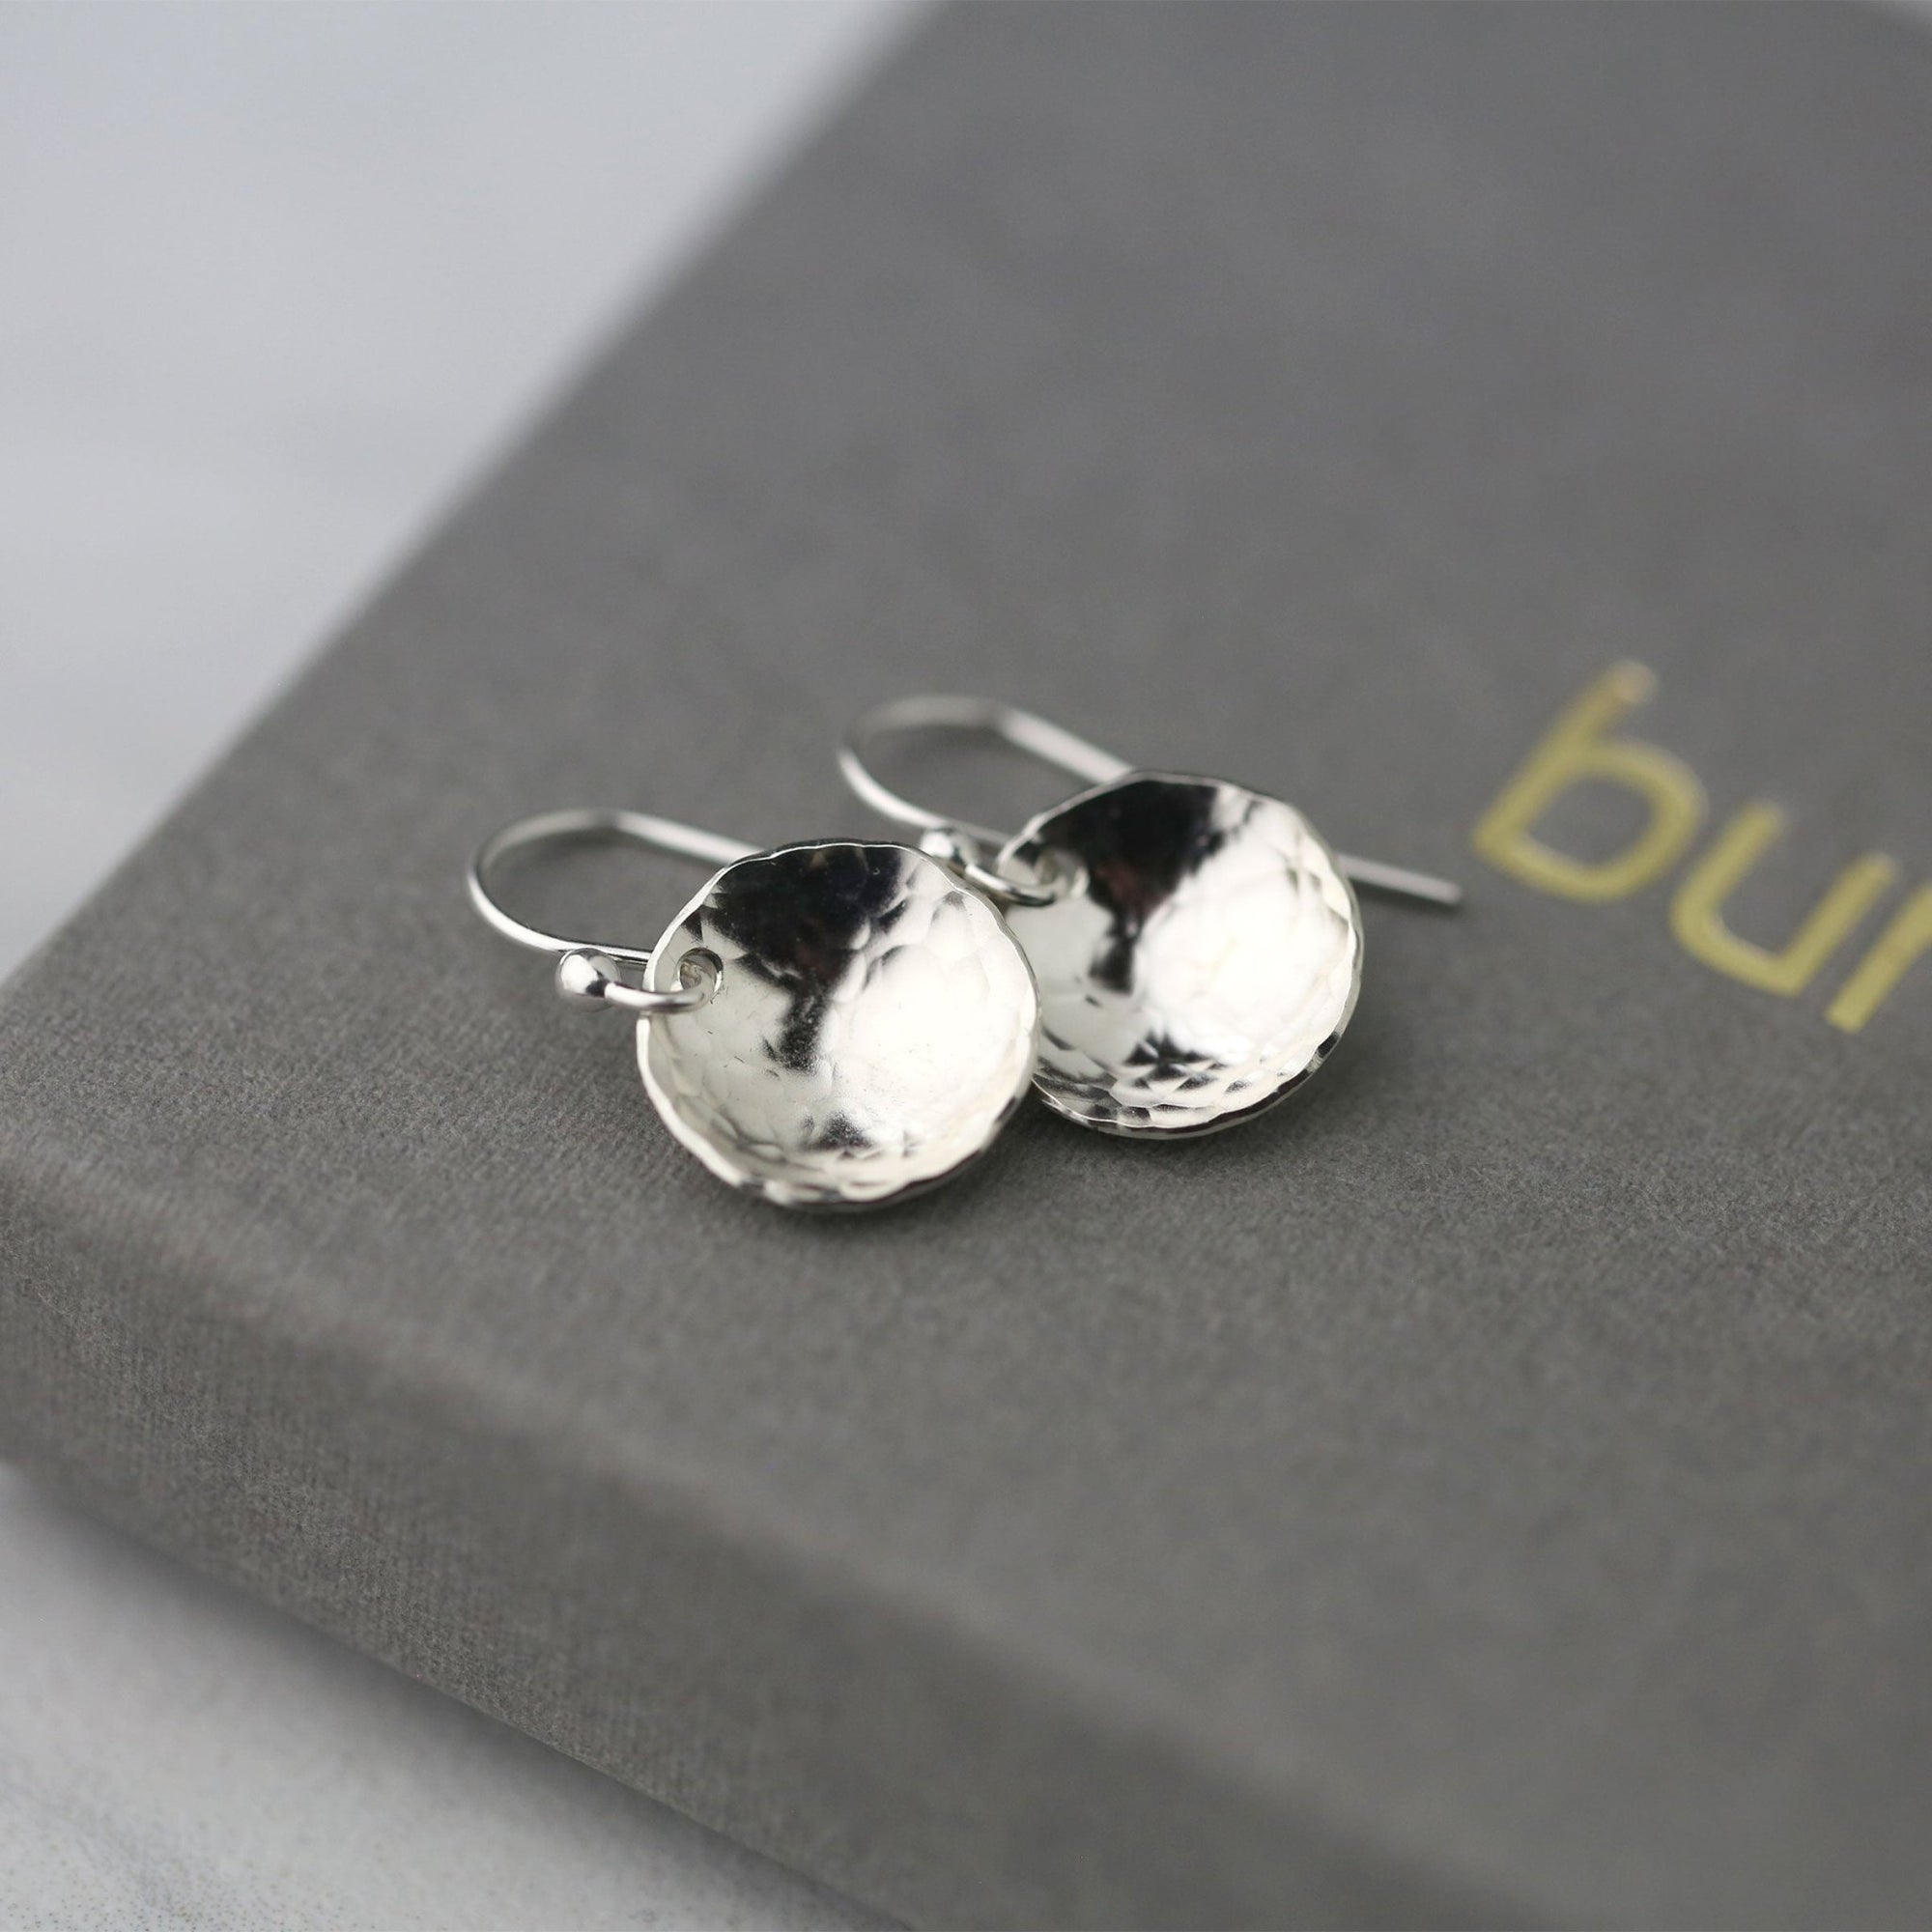 Silver Medium Hammered Domed Disc Earrings